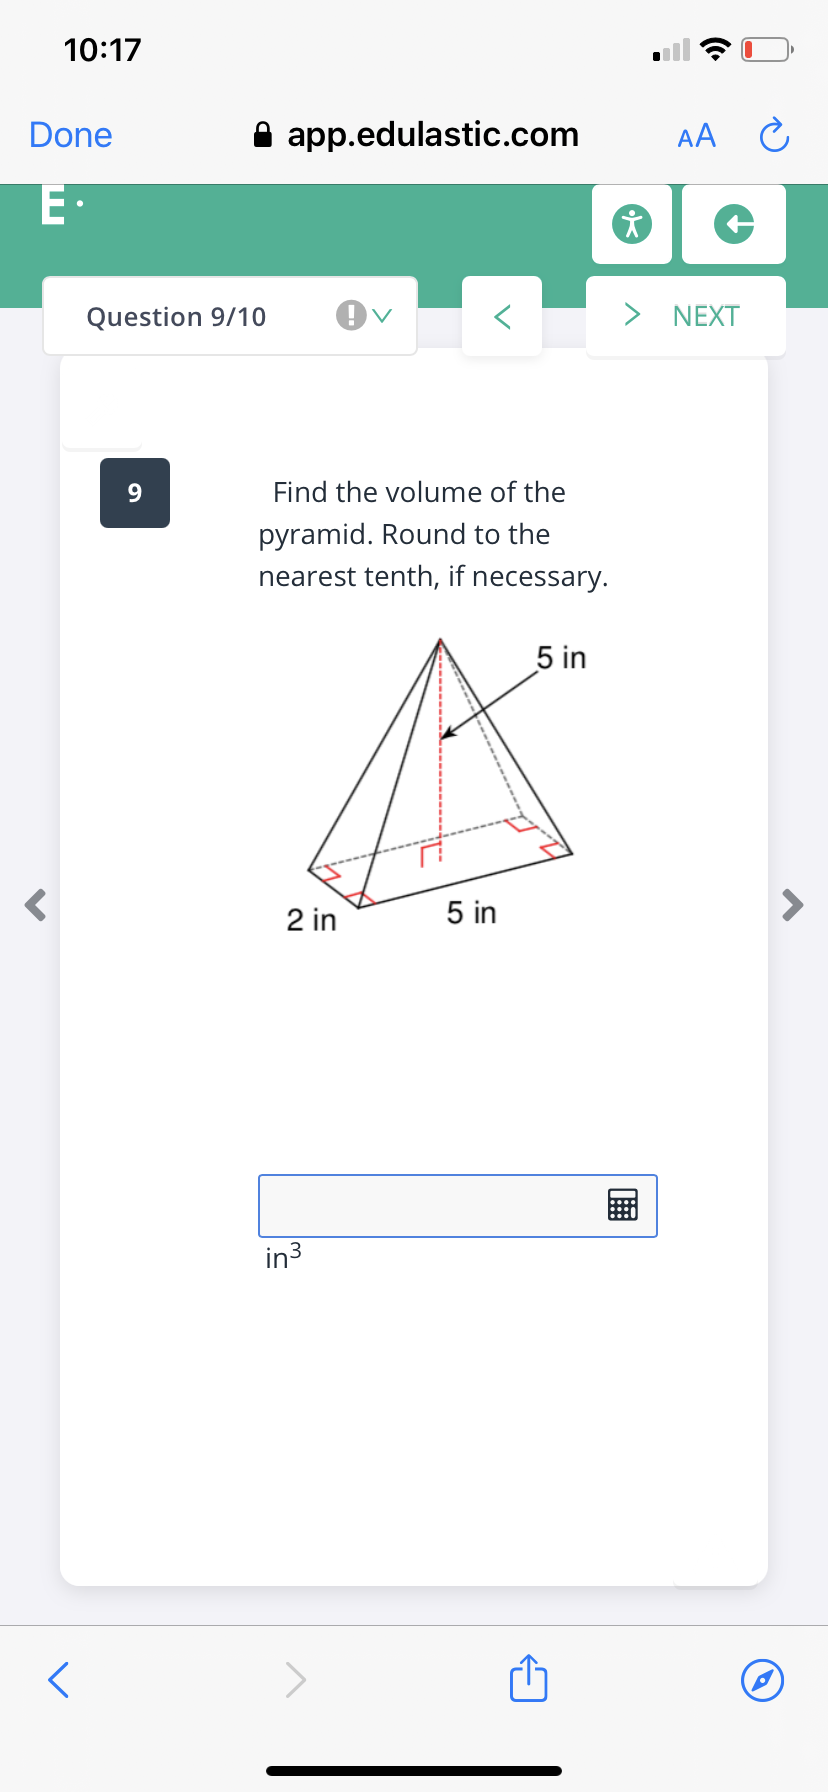 10:17
Done
A app.edulastic.com
E•
Question 9/10
> NEXT
9
Find the volume of the
pyramid. Round to the
nearest tenth, if necessary.
5 in
2 in
5 in
in3
